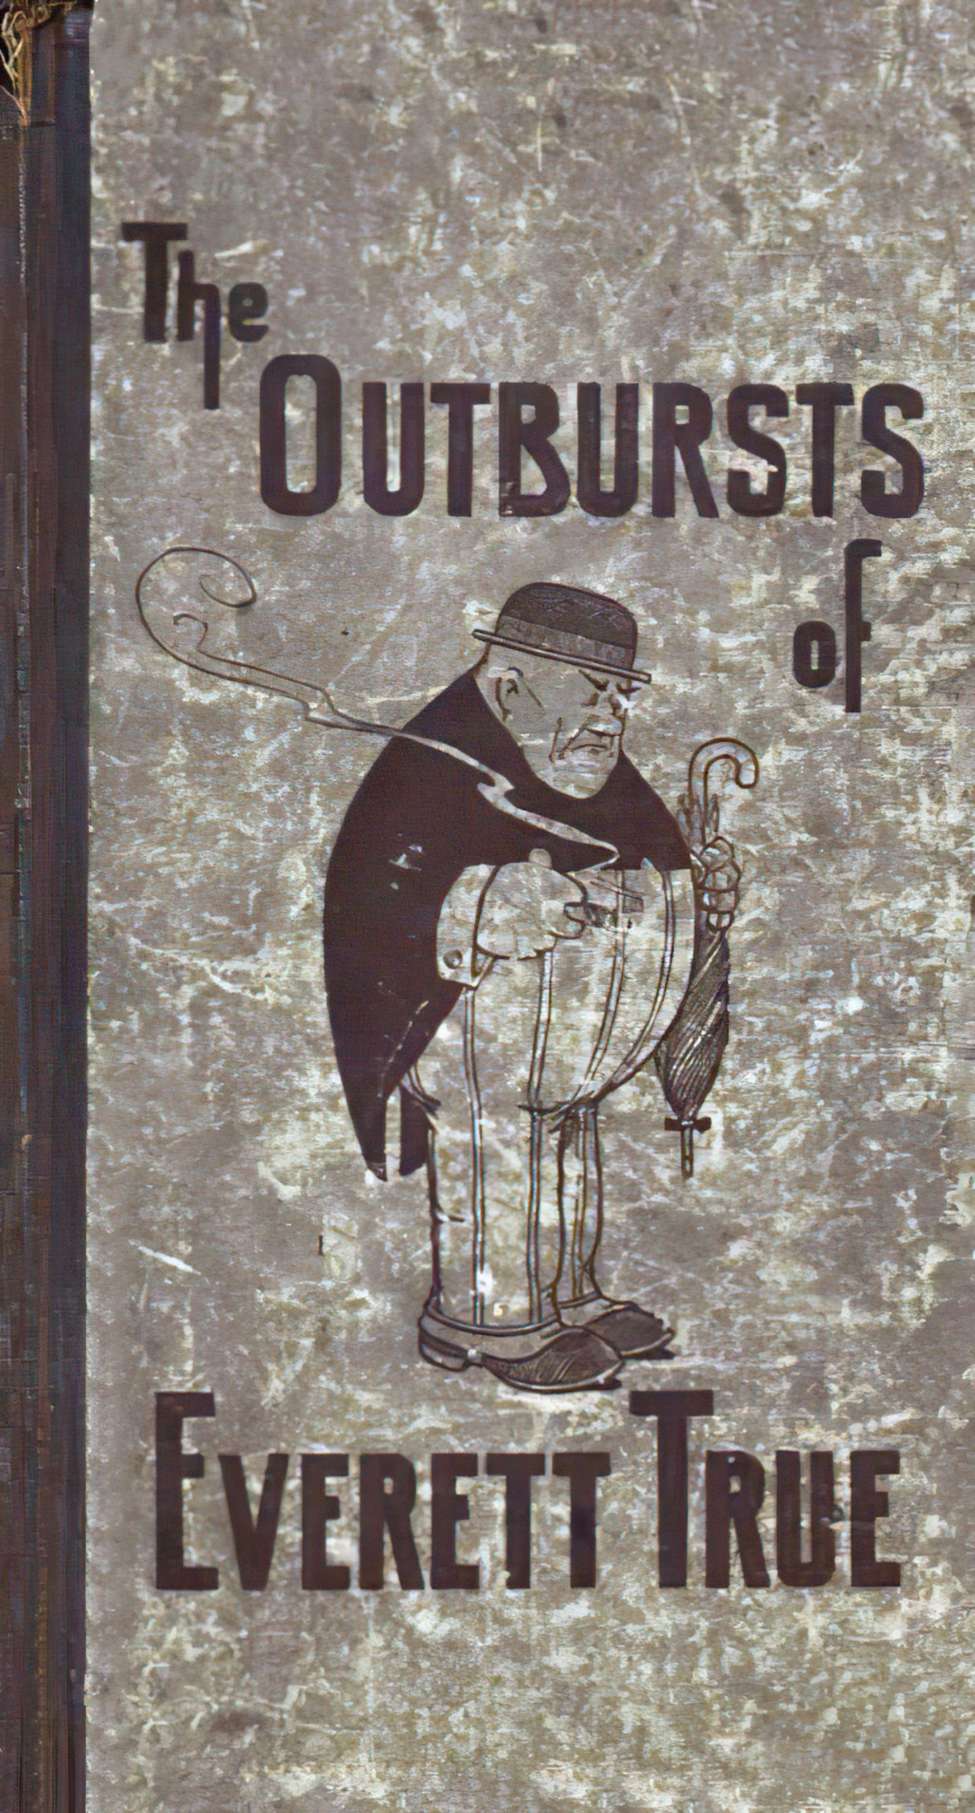 Comic Book Cover For Outbursts of Everett True